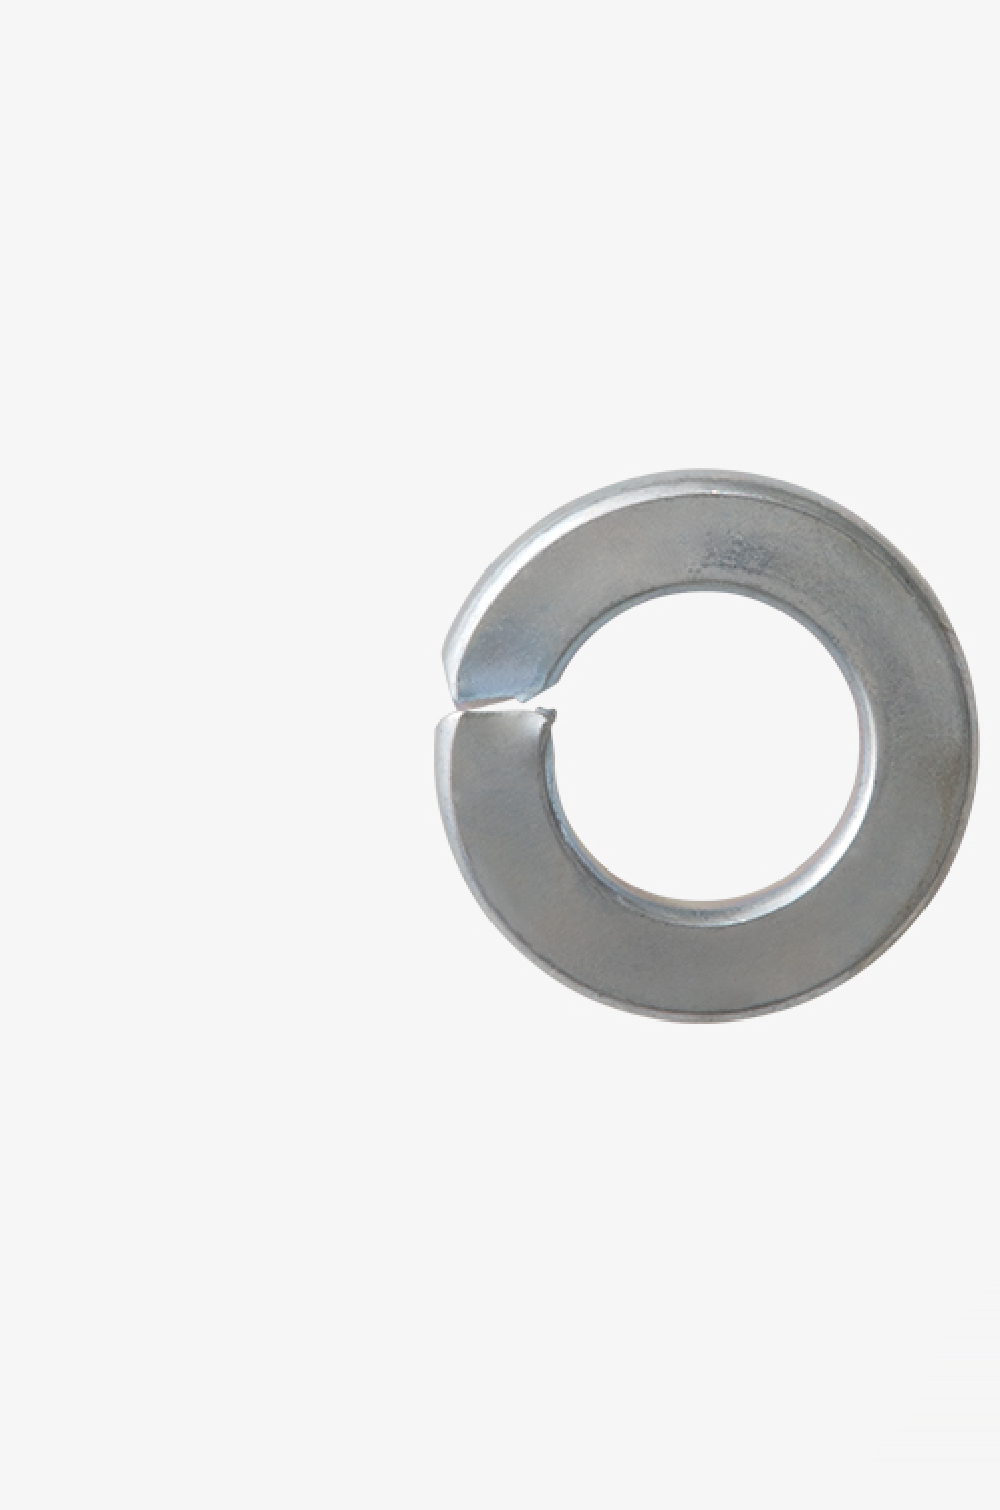 Washers for Hexagon Nut (10 pcs.)